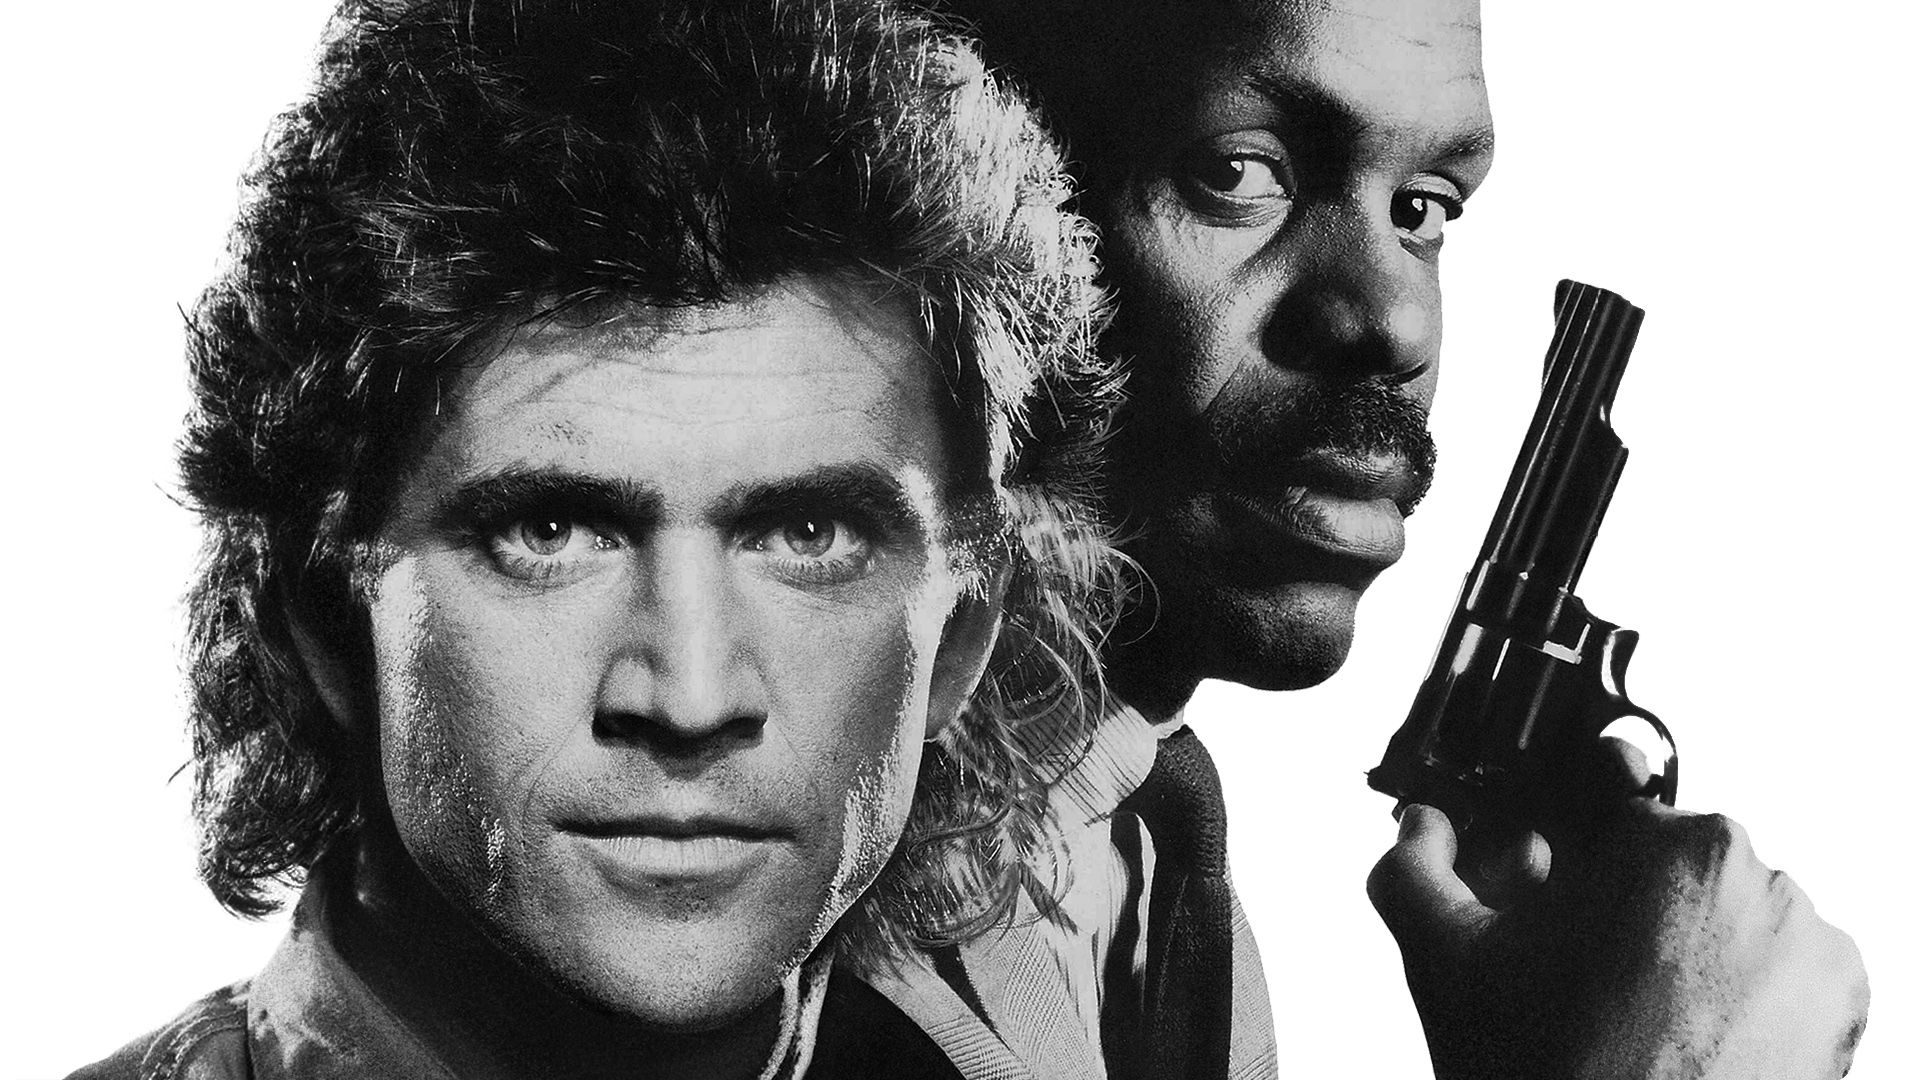 Lethal Weapon background